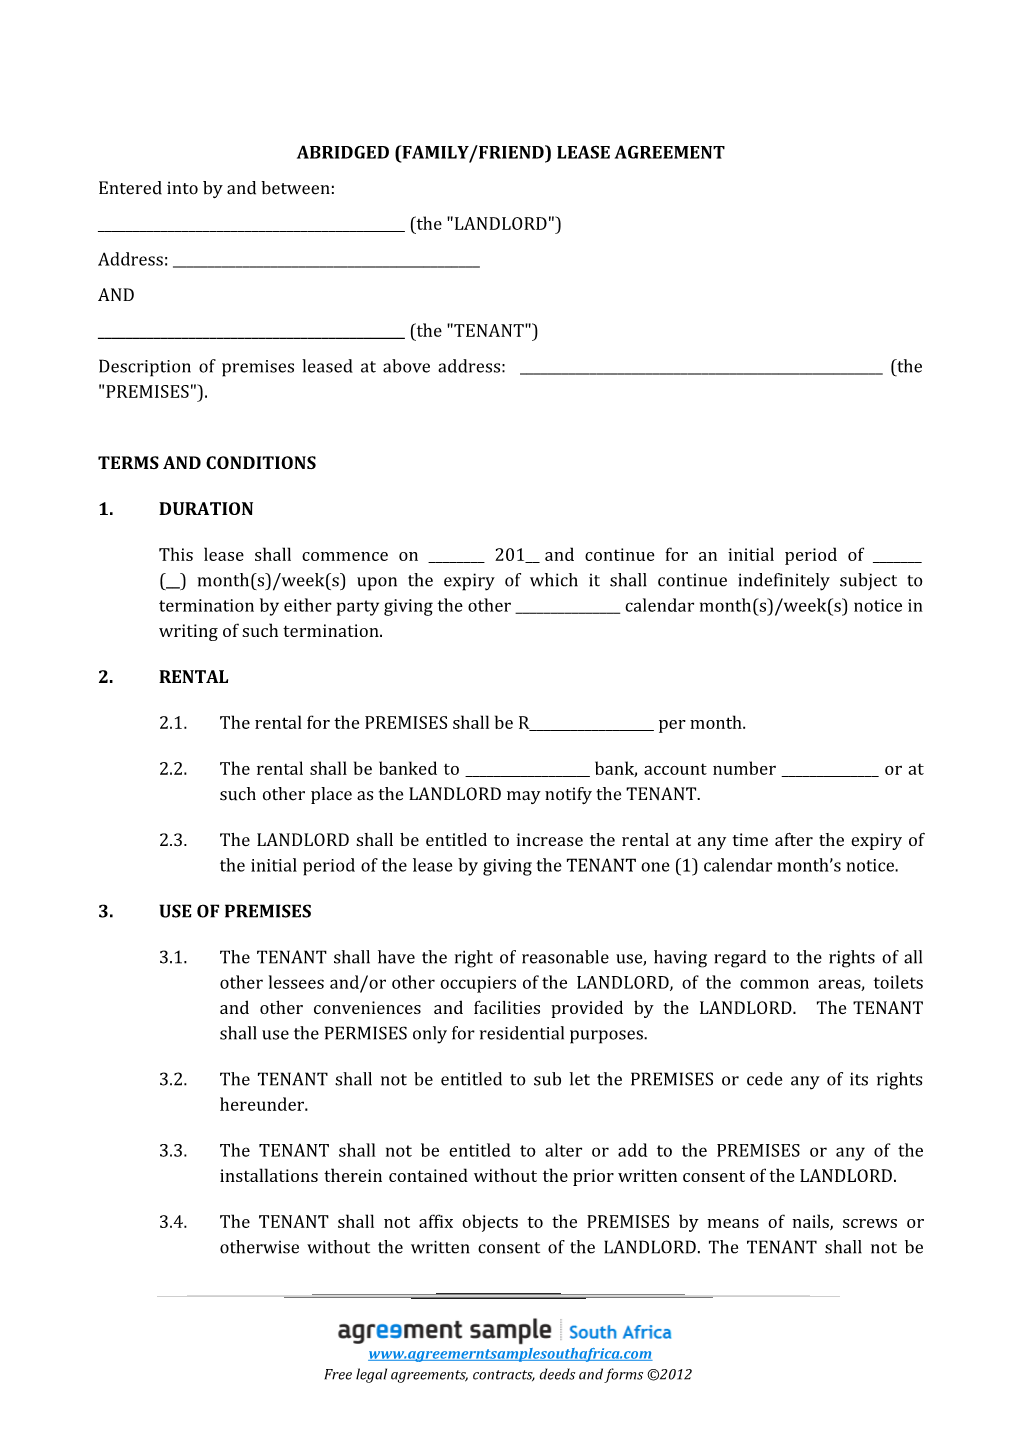 South Africa Abridged (Family/Friend) Lease Agreement